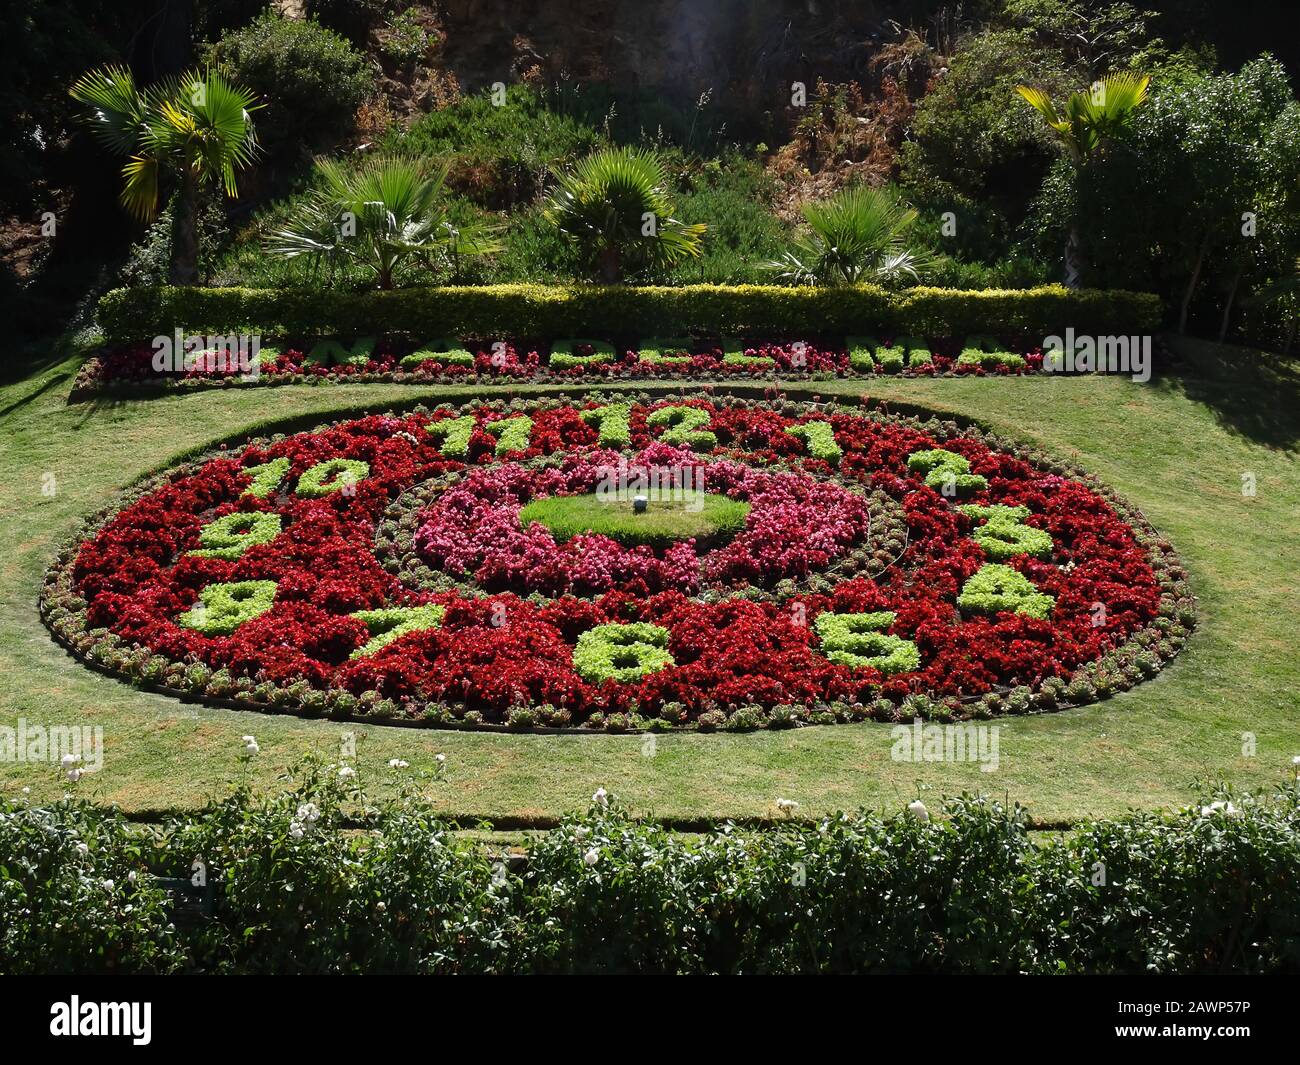 Flower clock located in Chile Stock Photo